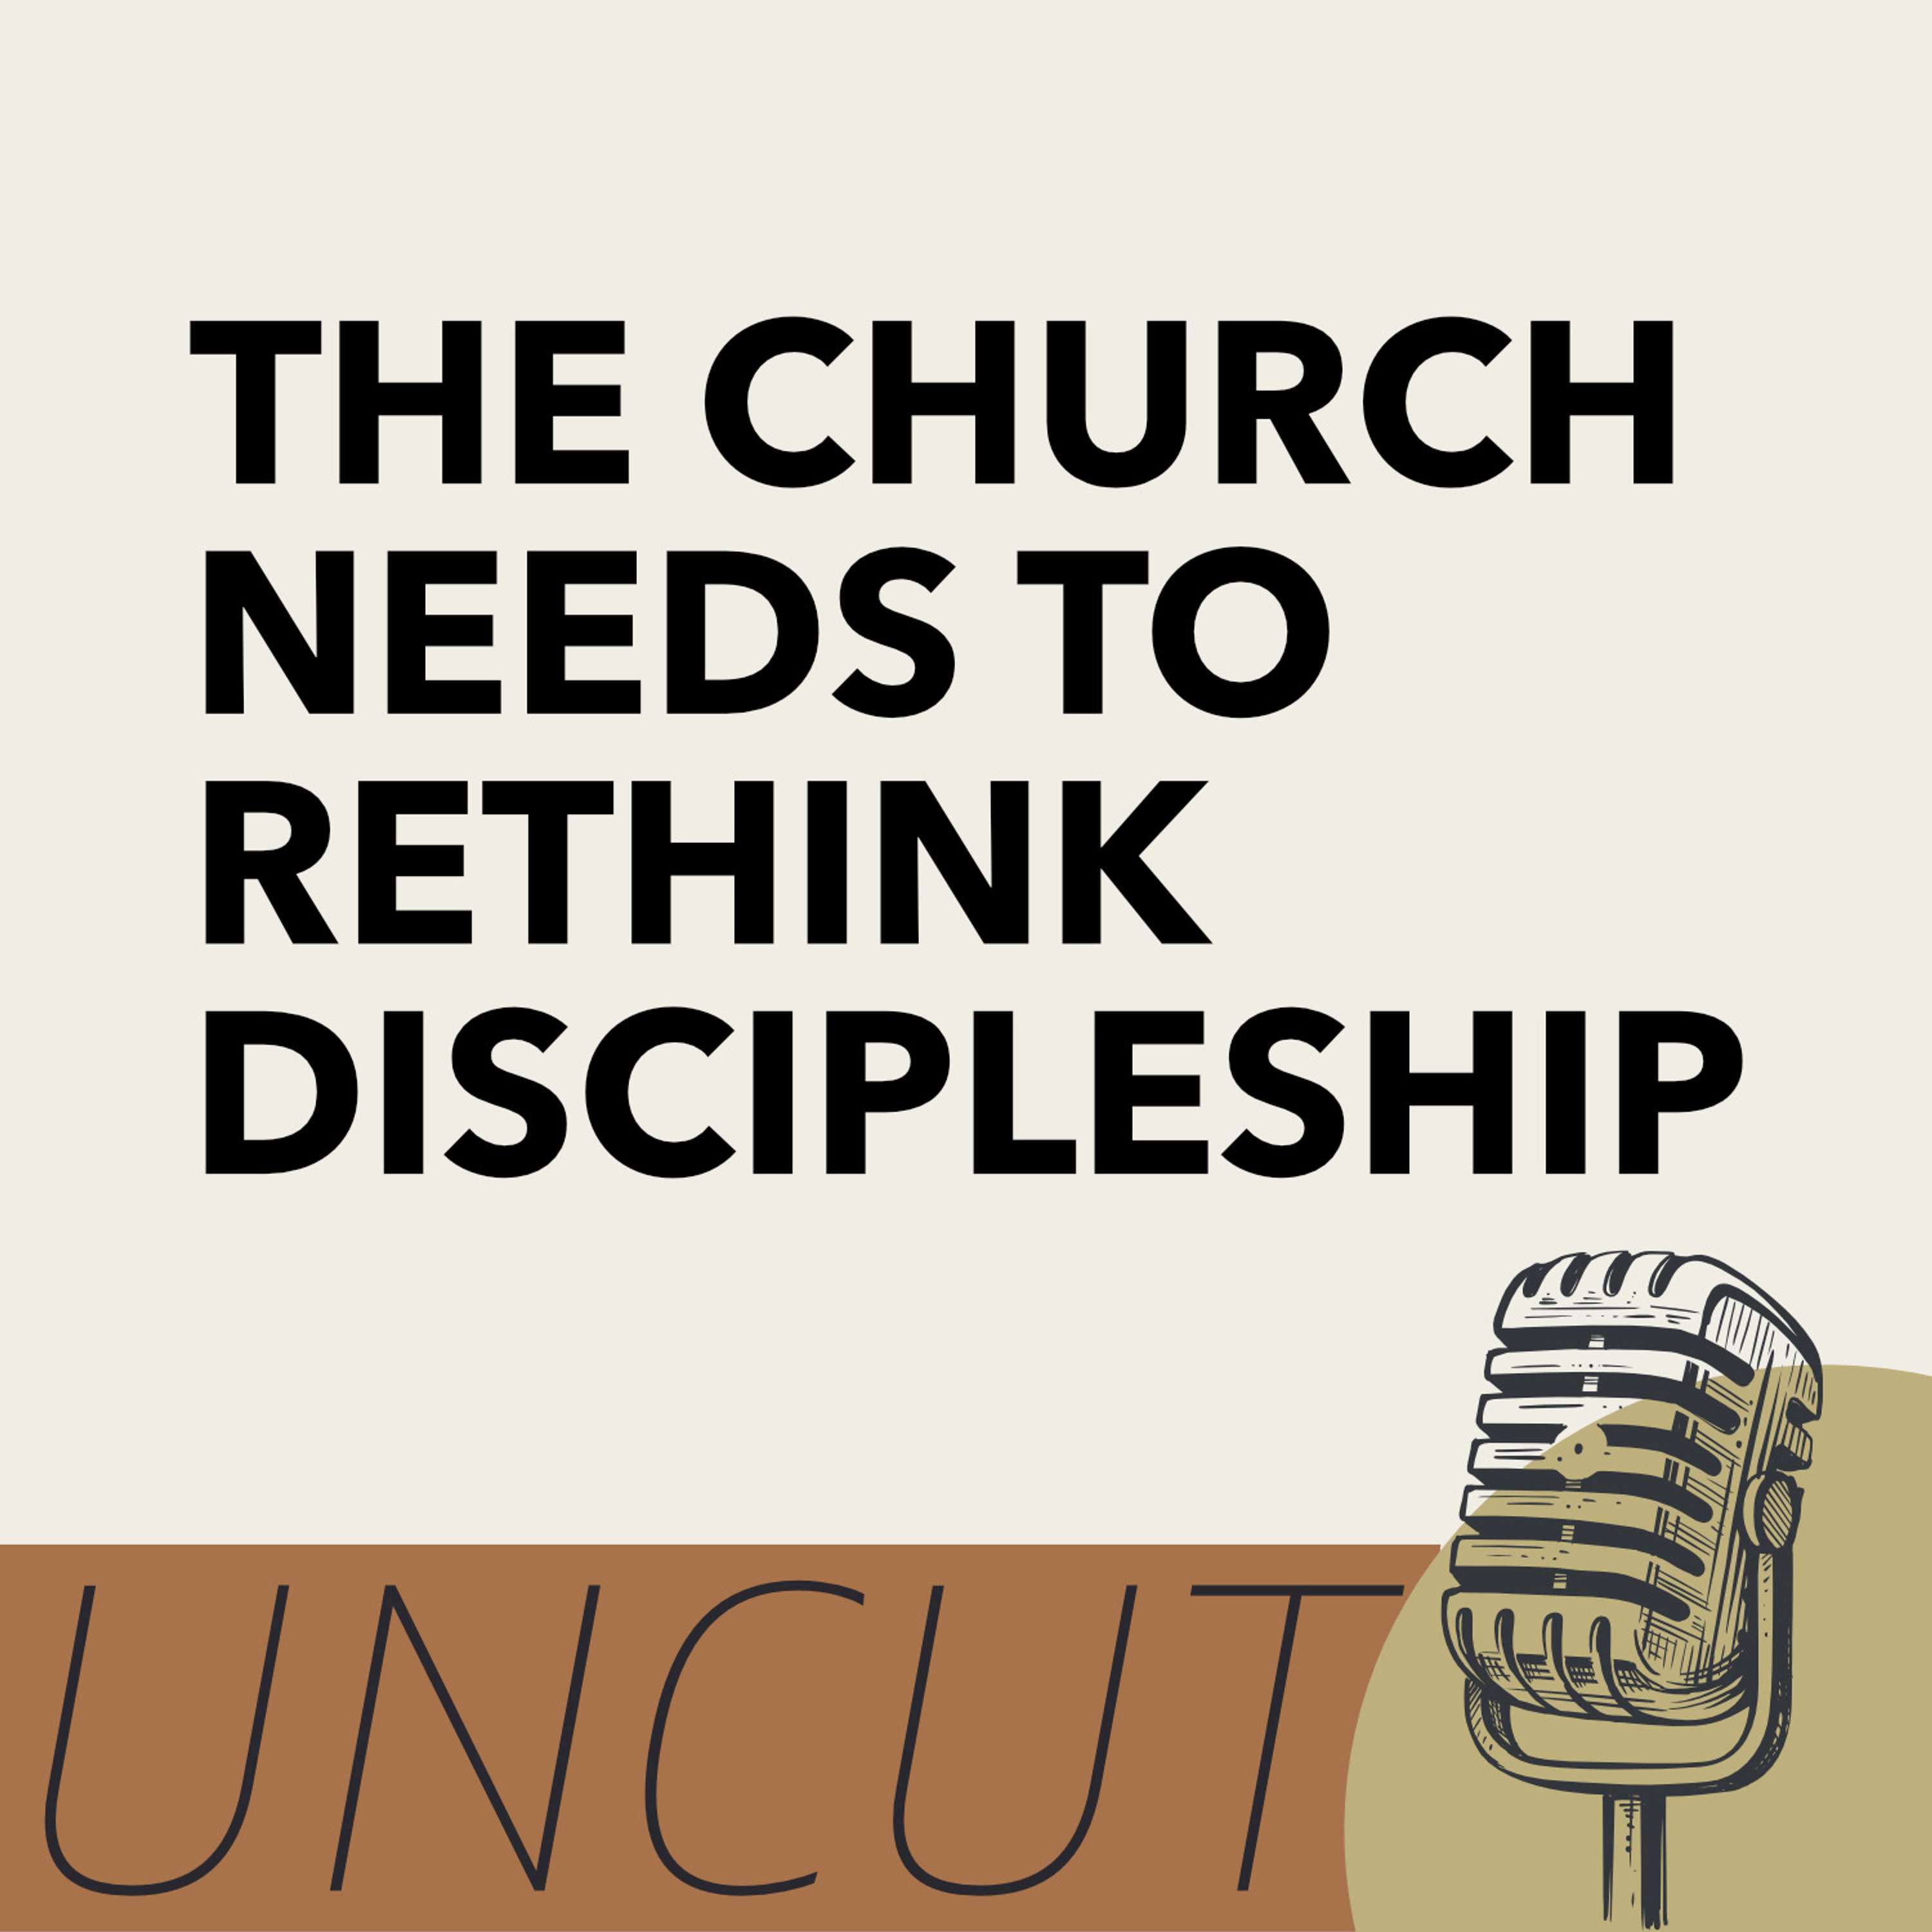 The Church needs to Rethink Discipleship